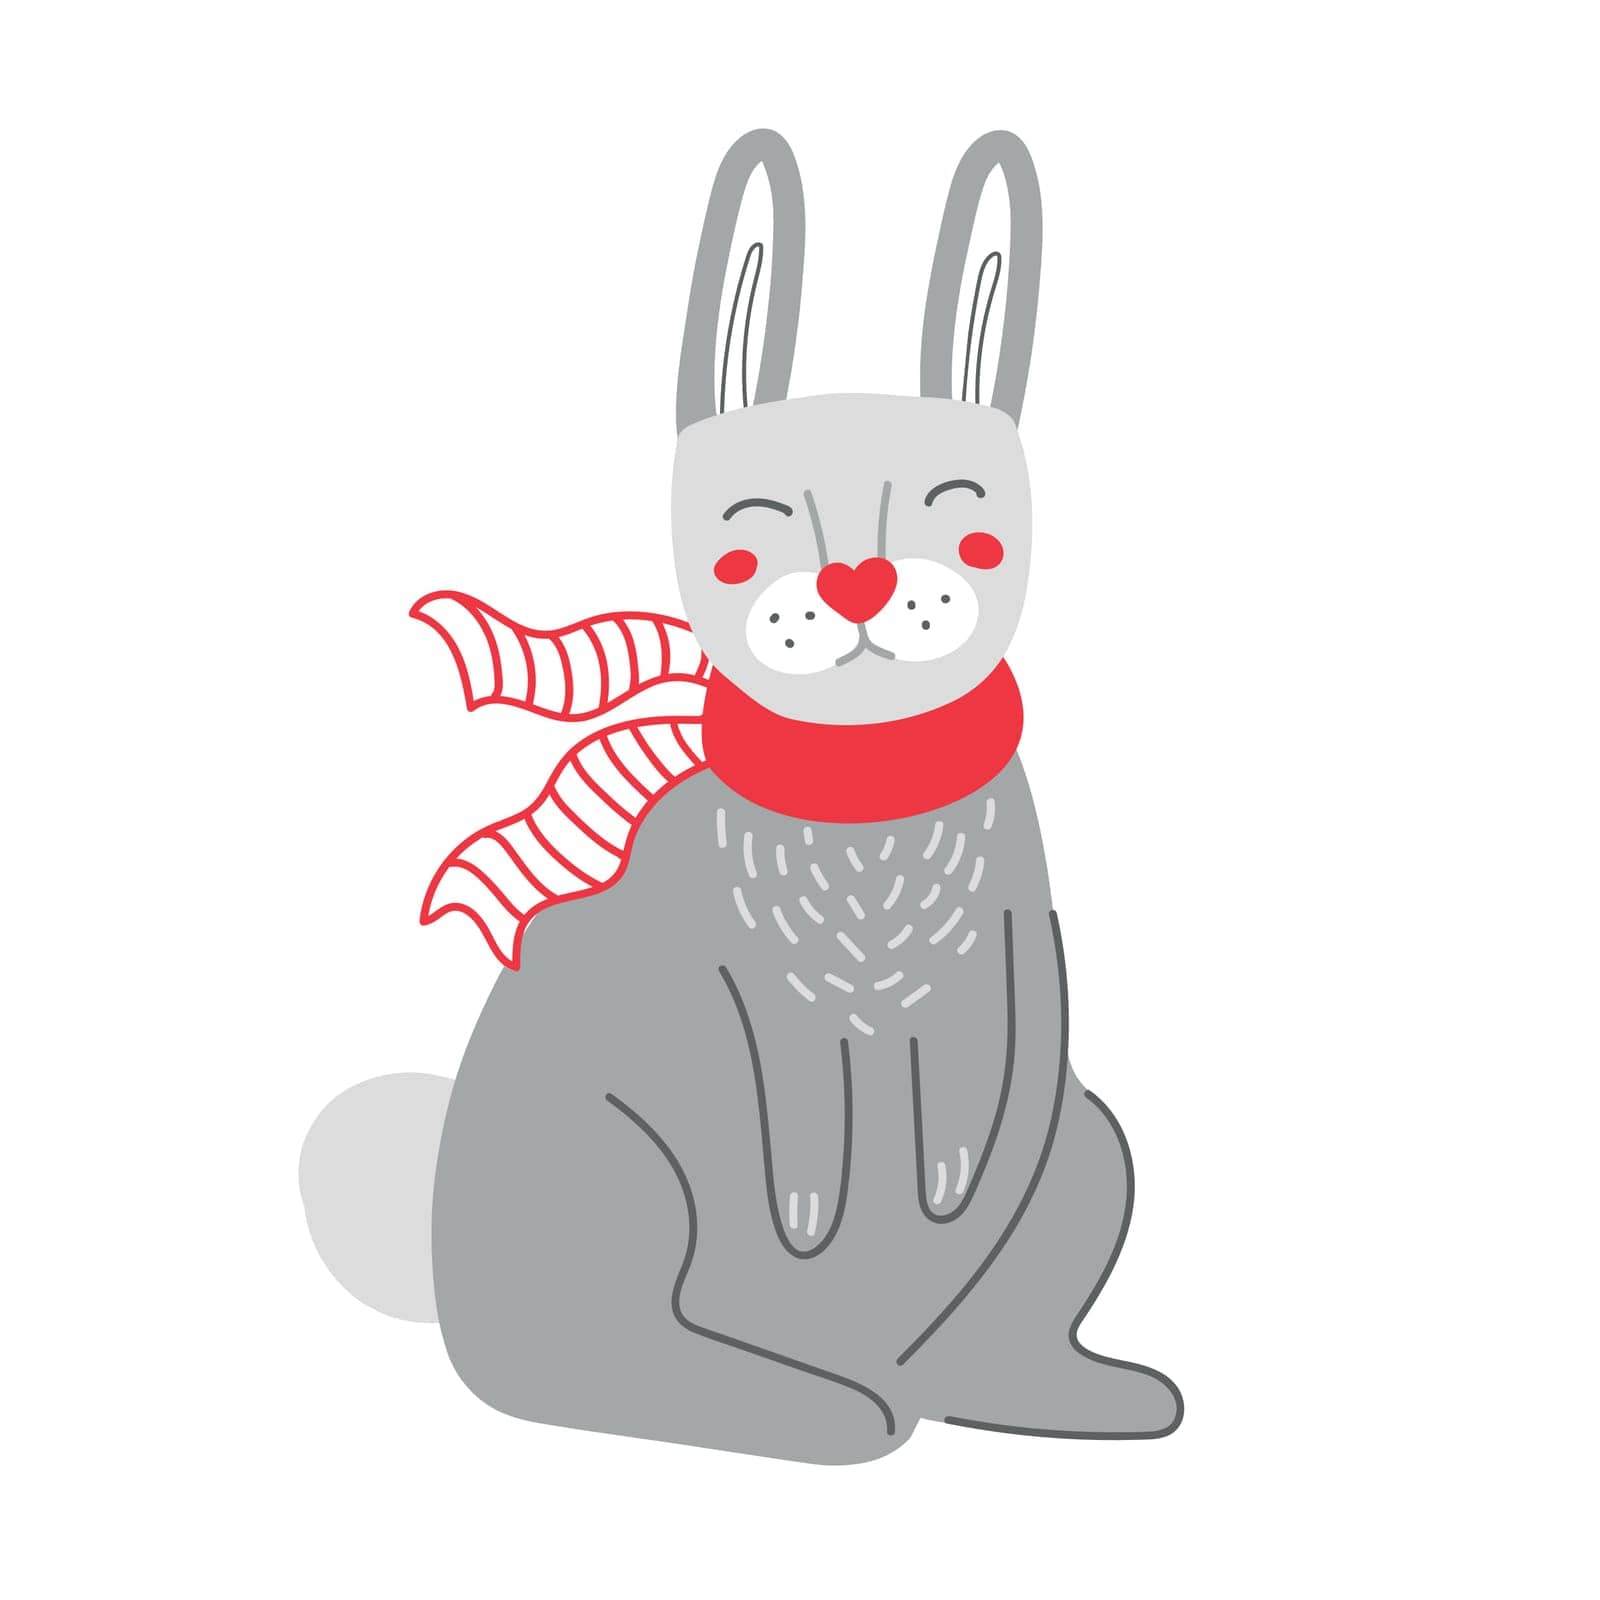 Funny cartoon rabbit in red scarf during Christmas holidays. Vector illustration on a white background